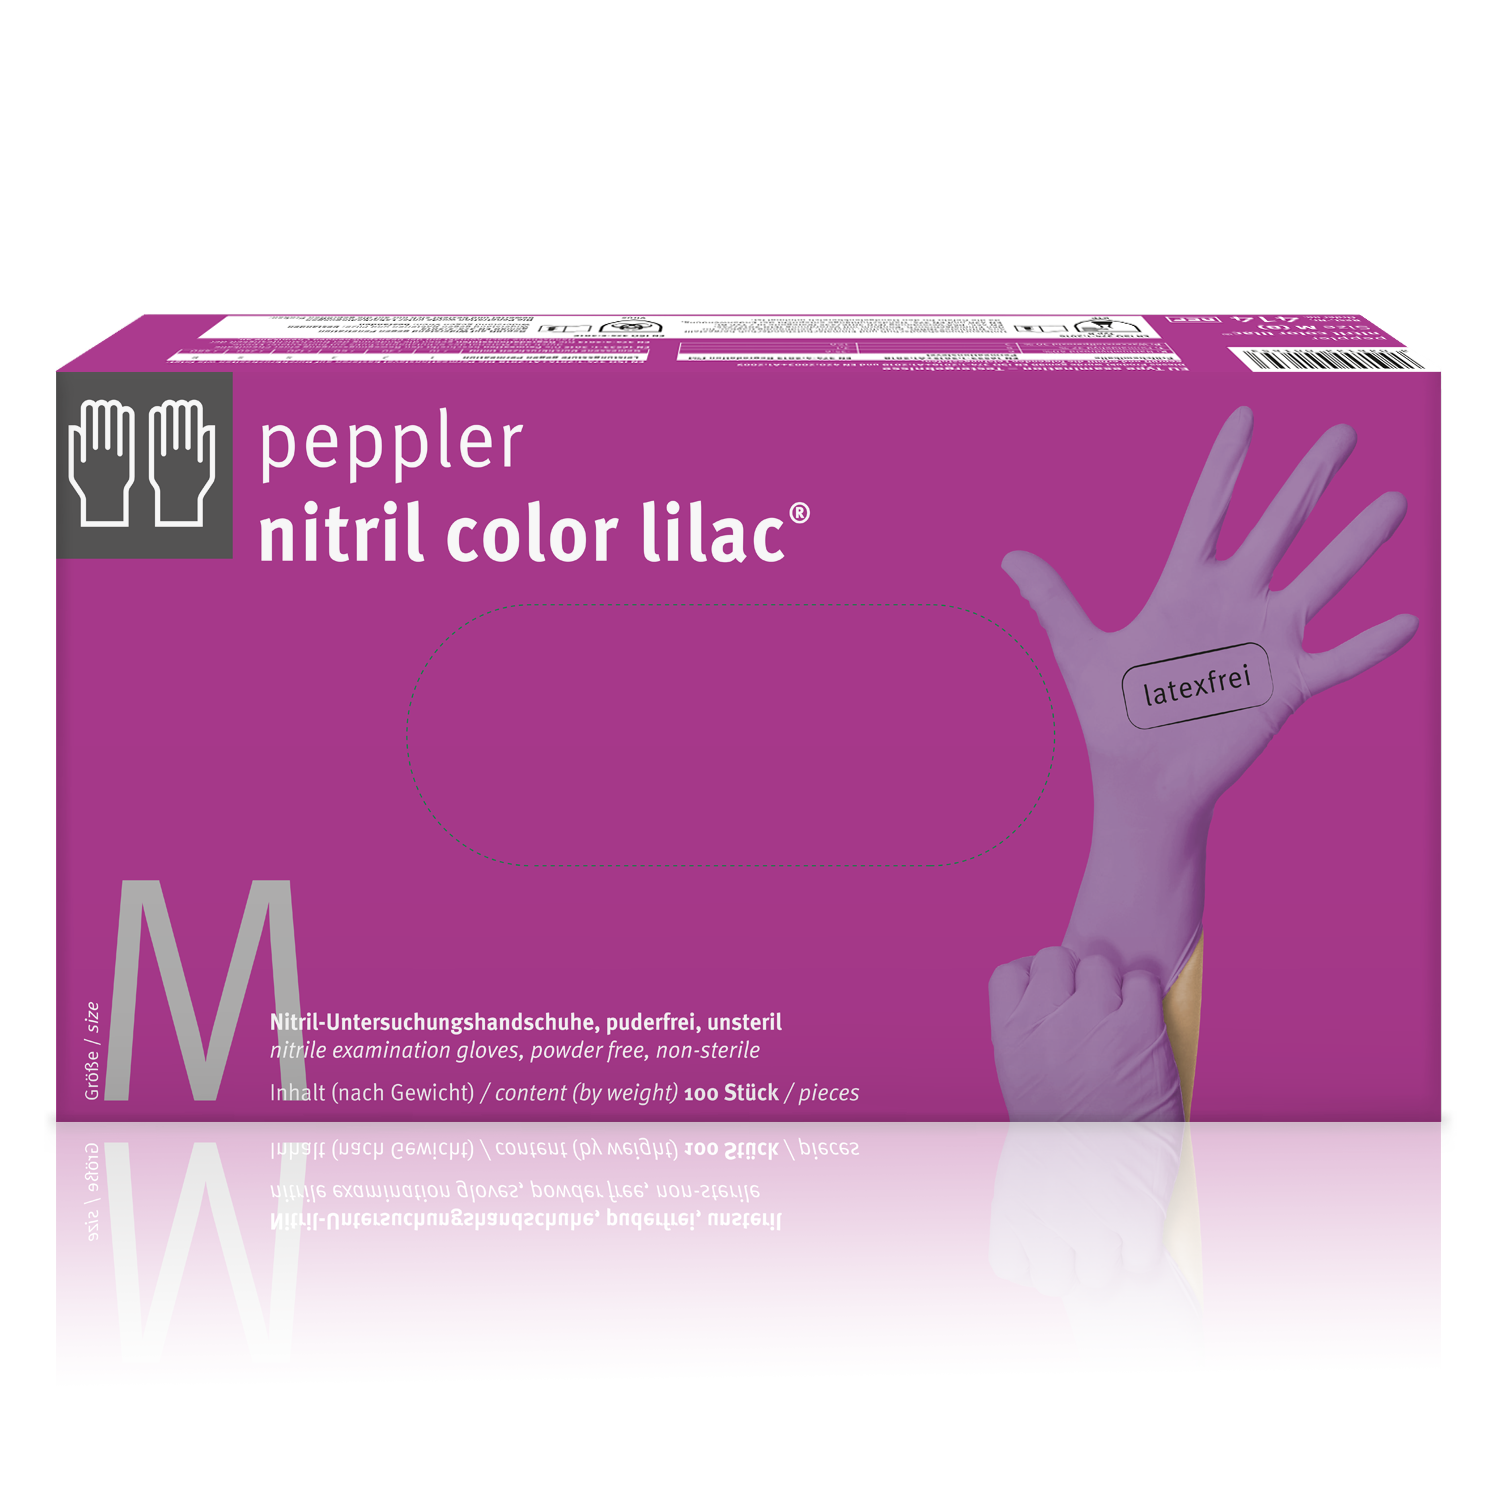 Muster Nitril Color lilac Einmalhandschuh puderfrei und latexfrei